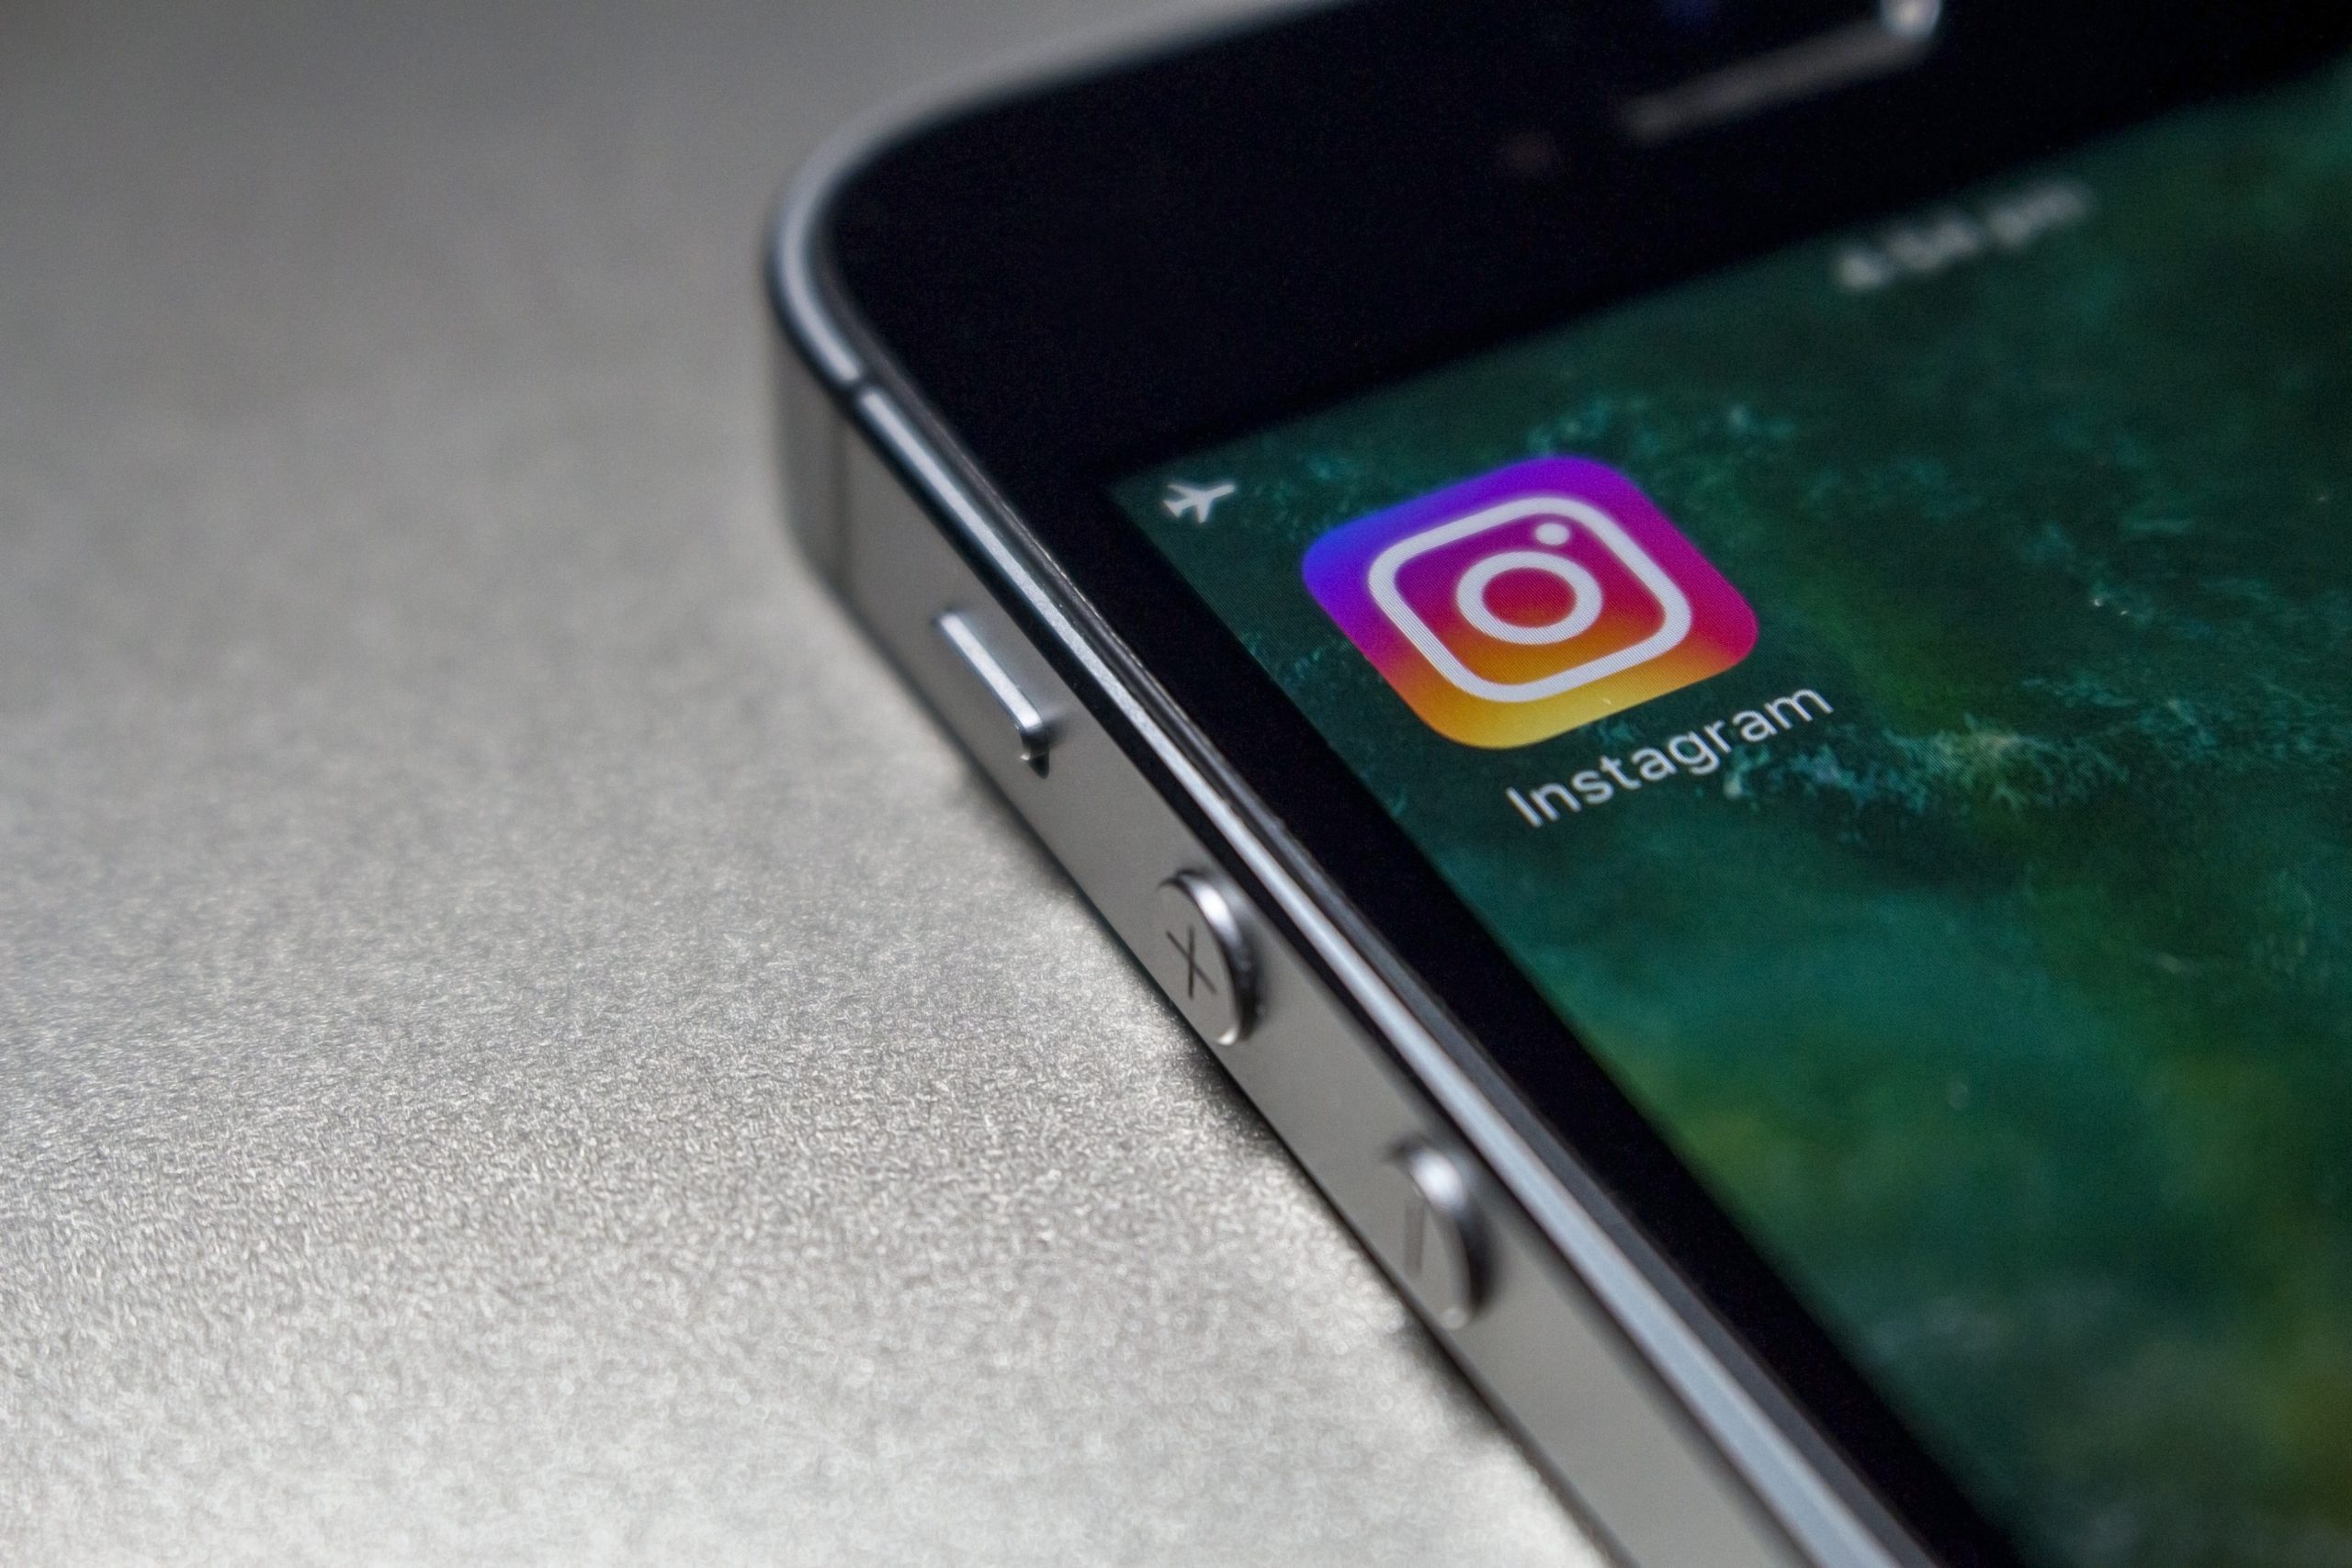 Instagram Adds New Chronological Views to Home Feed: Following and Favorites